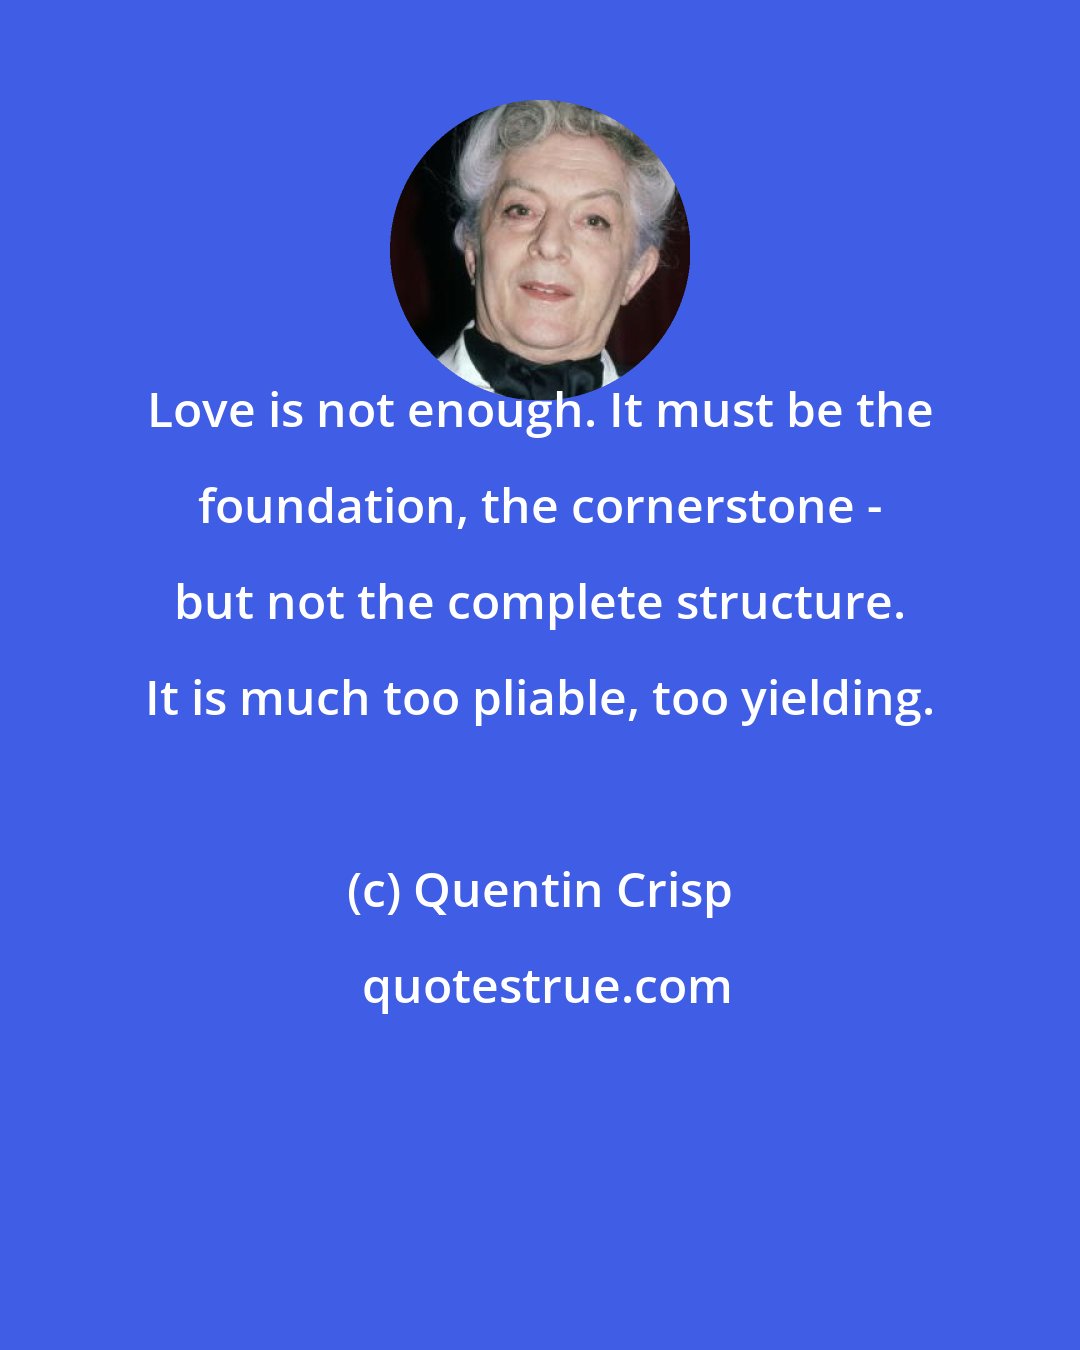 Quentin Crisp: Love is not enough. It must be the foundation, the cornerstone - but not the complete structure. It is much too pliable, too yielding.